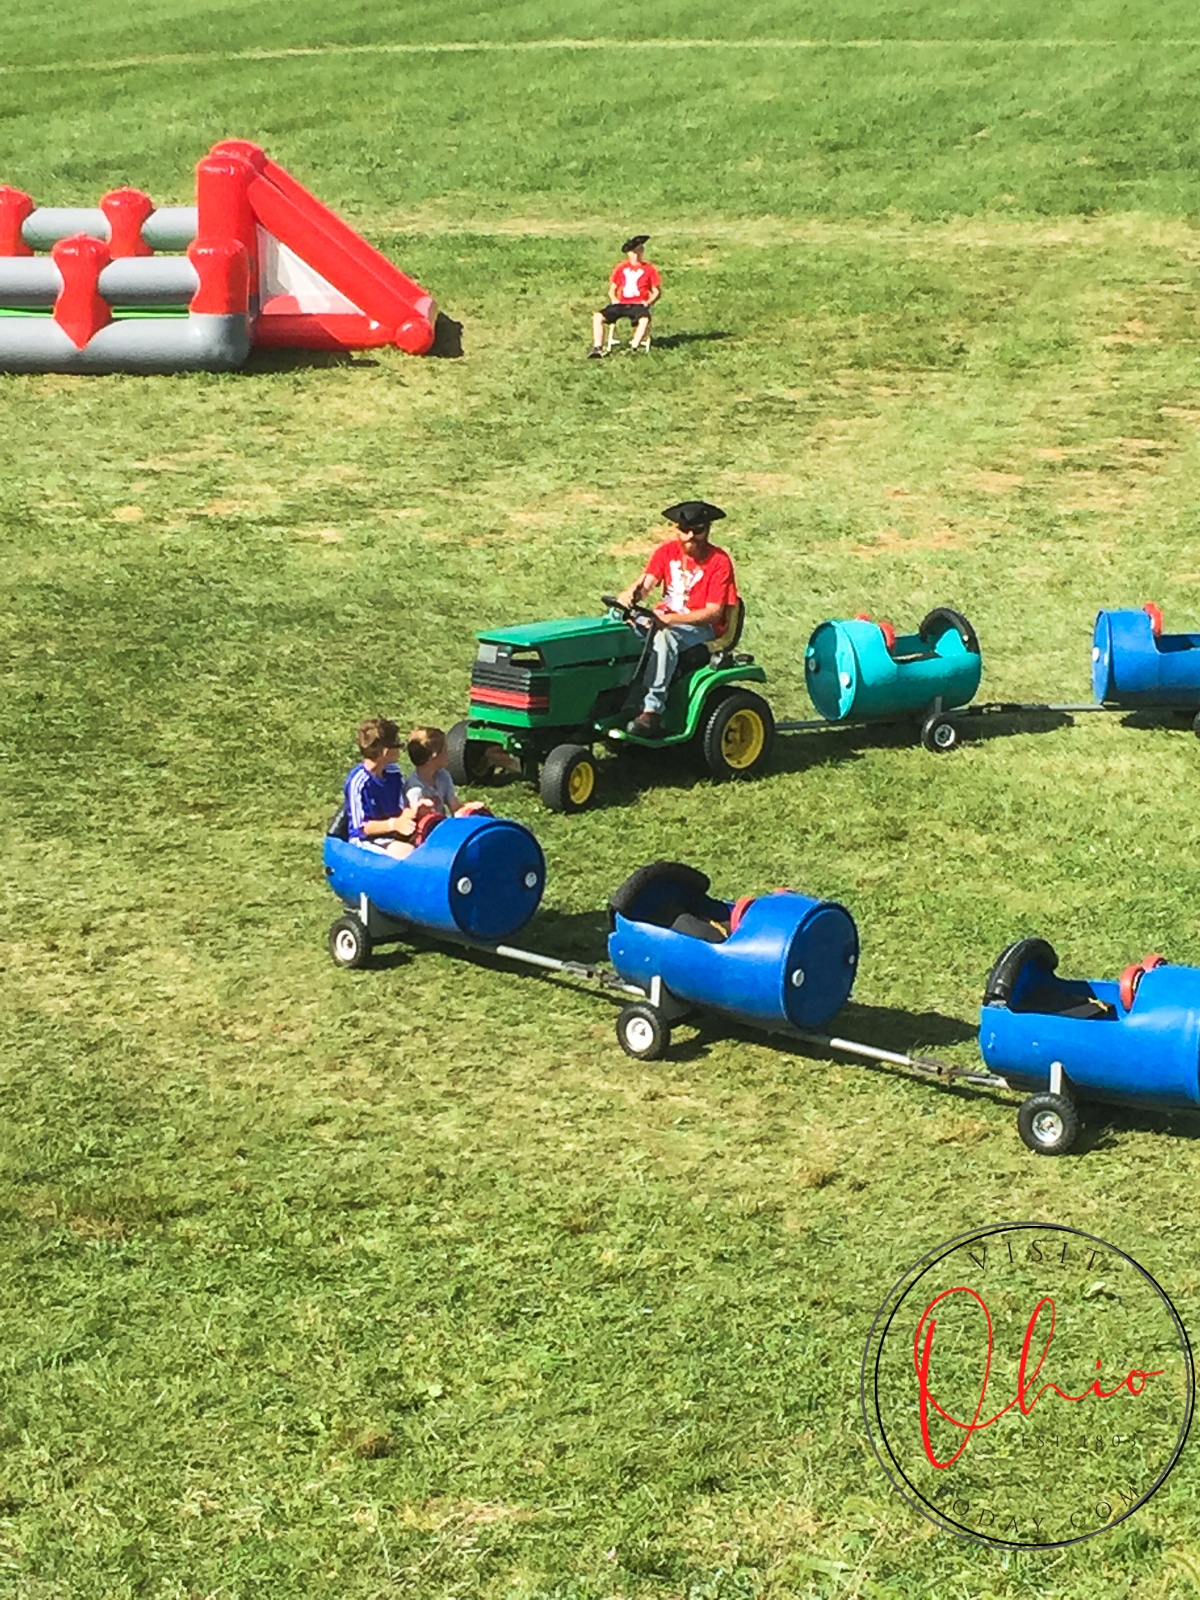 barrel train, can see driver on tractor and two kids in a barrel cart